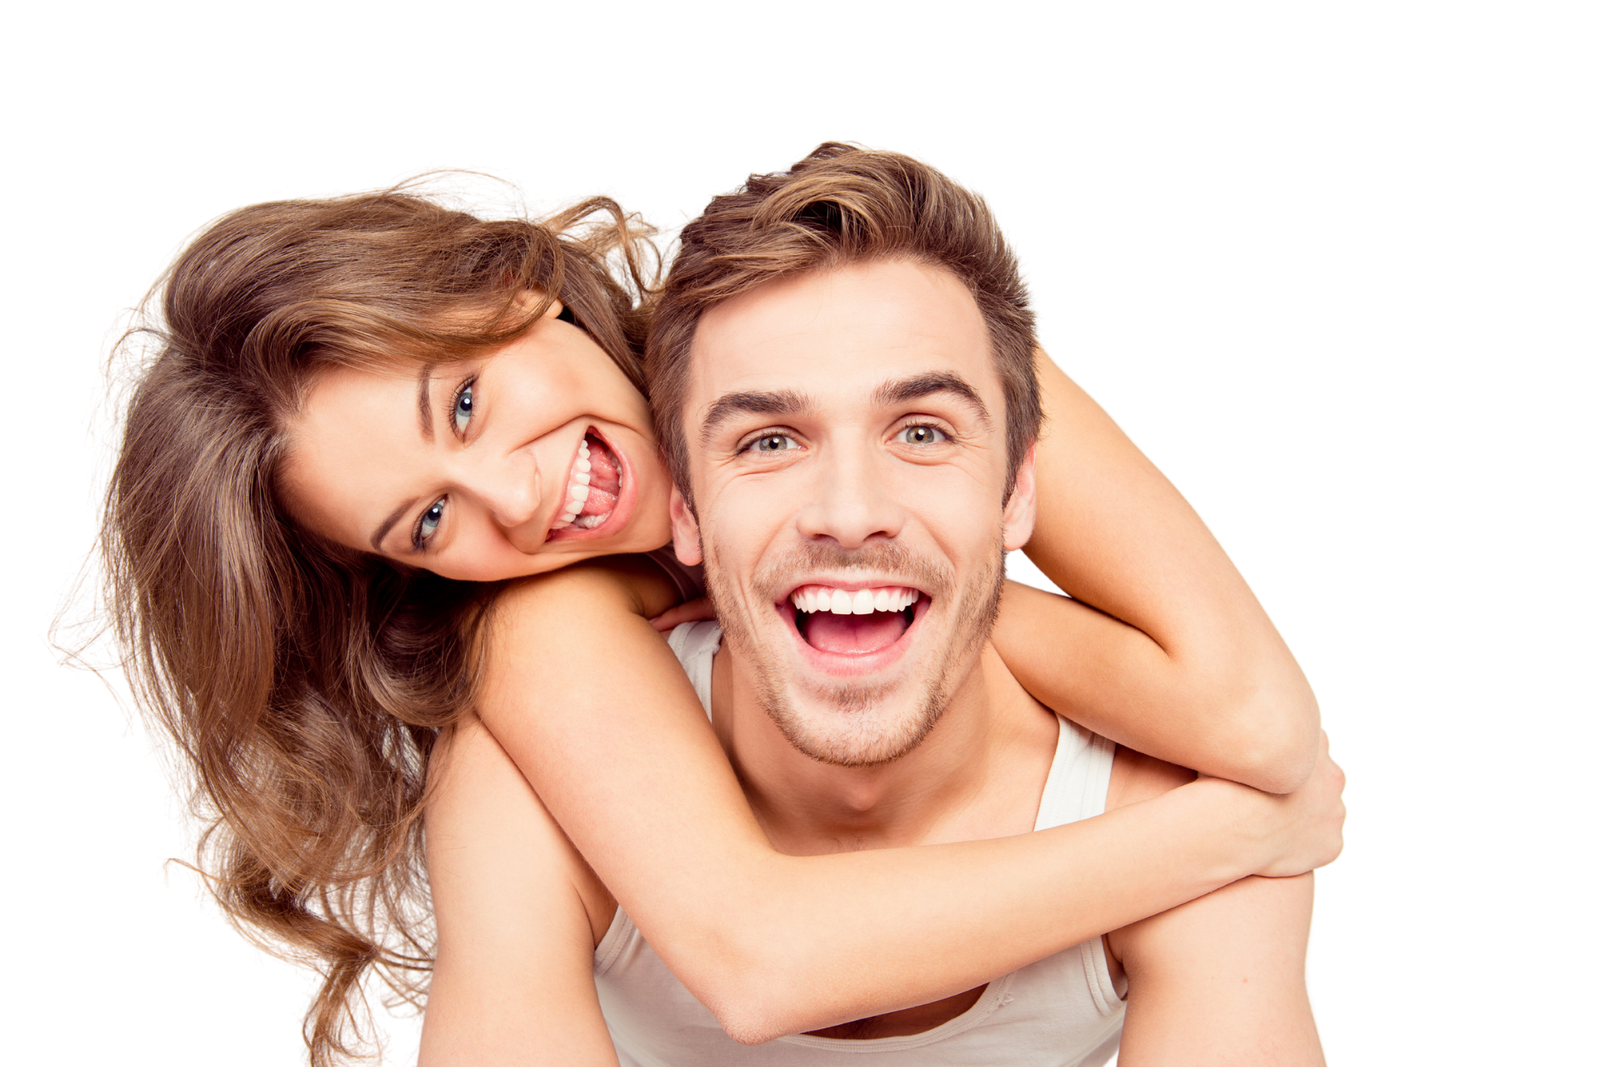 Main image for "urgent dental care" page showing a woman and man (couple) showing big smiles with healthy teeth.